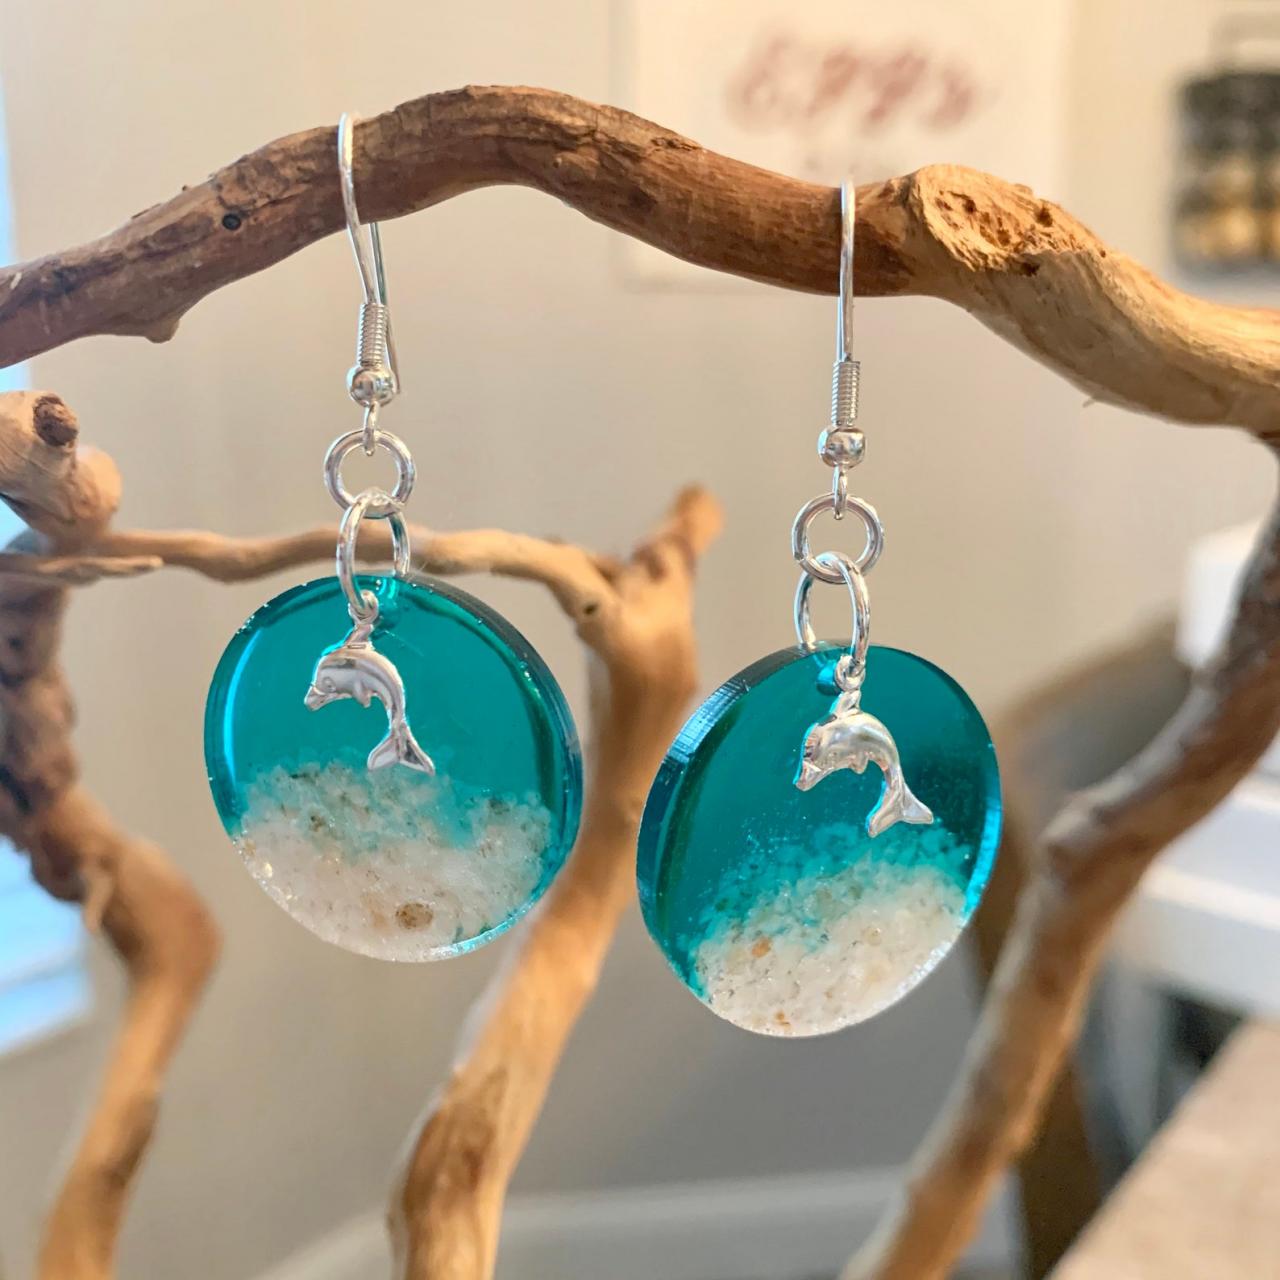 Resin Jewelry,dolphin Earrings,beach Jewelry, Jewelry For Women,gift,vacation Jewelry,ocean,birthday,grad Gift,tropical,wave,sand,summer